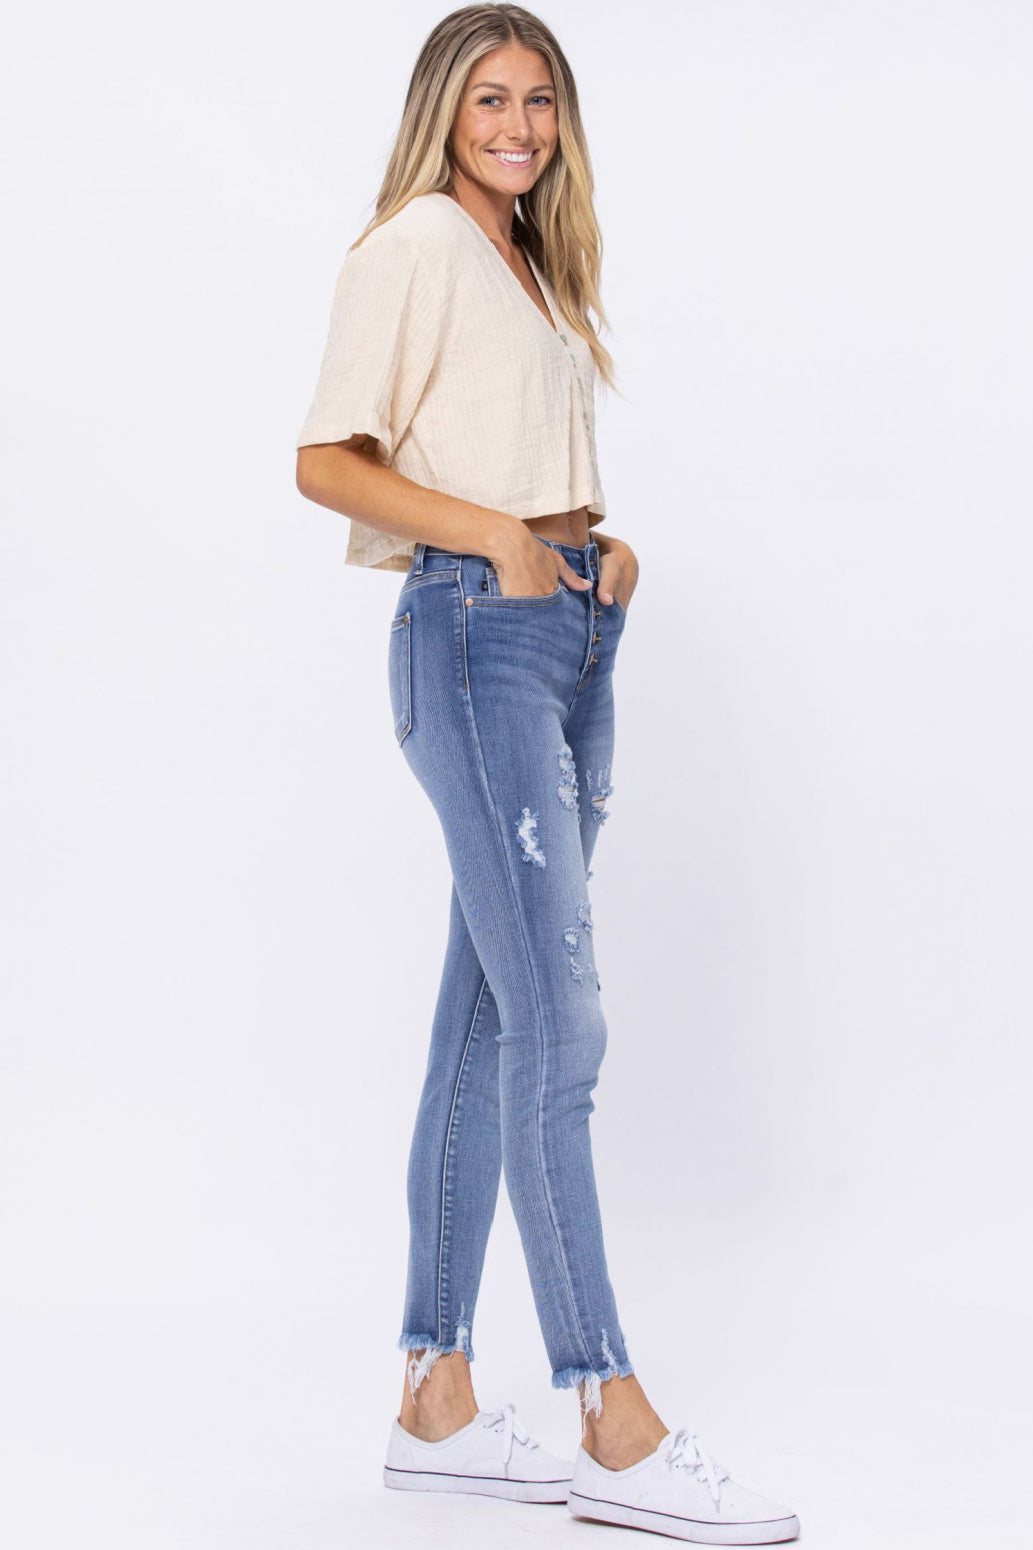 Judy Blue Button Fly Destroyed High Waist Skinny Jeans Style 82263